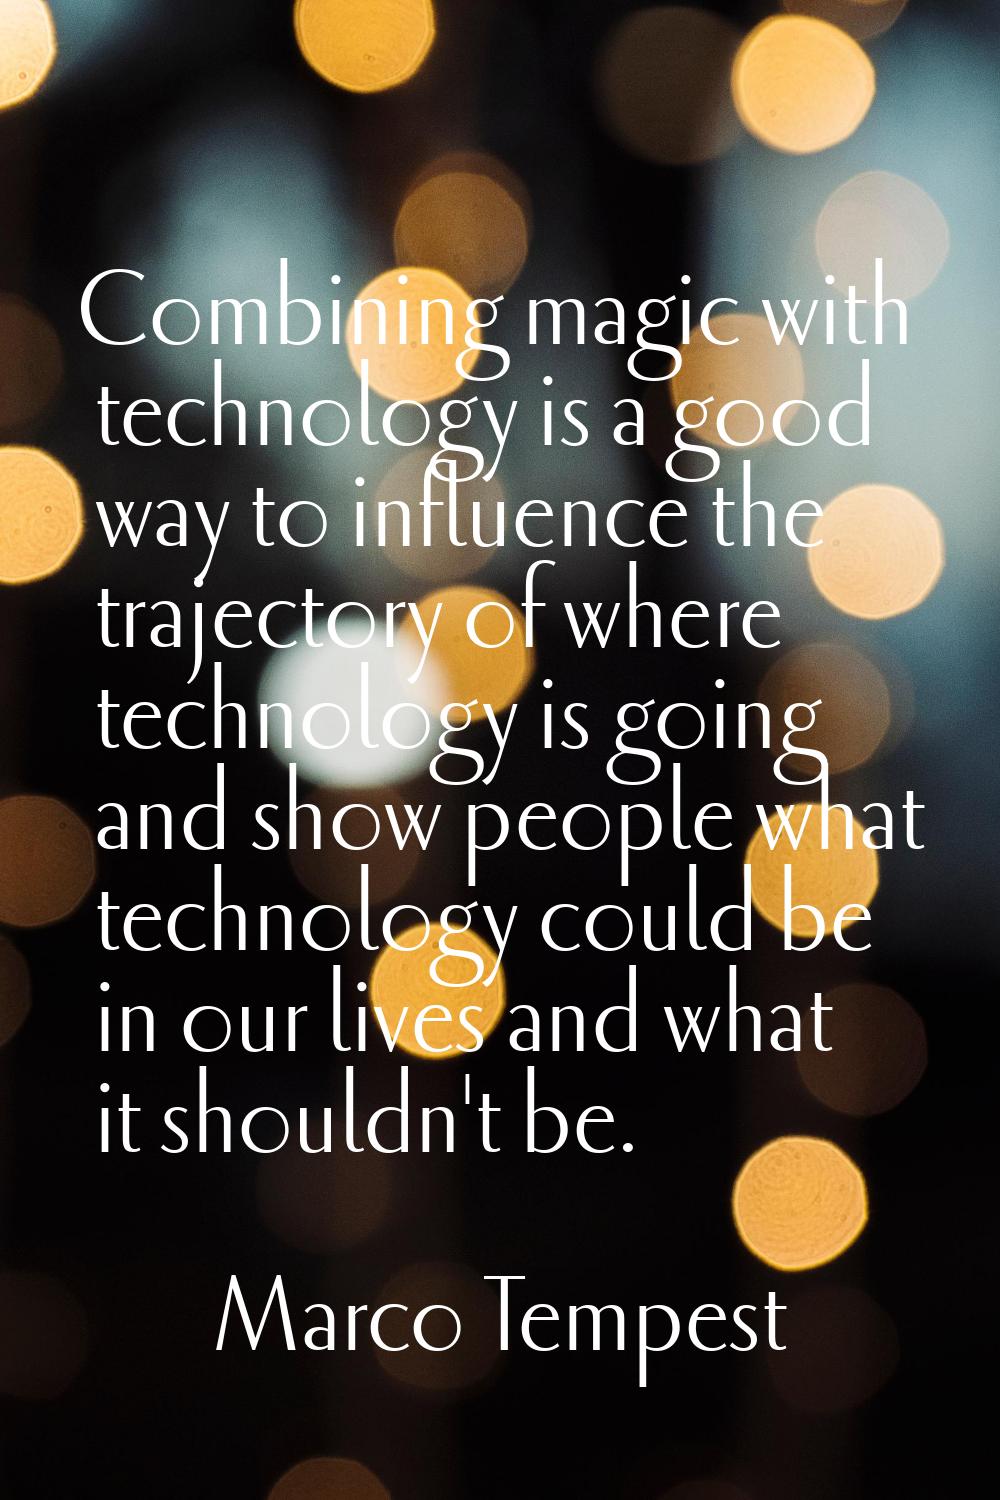 Combining magic with technology is a good way to influence the trajectory of where technology is go